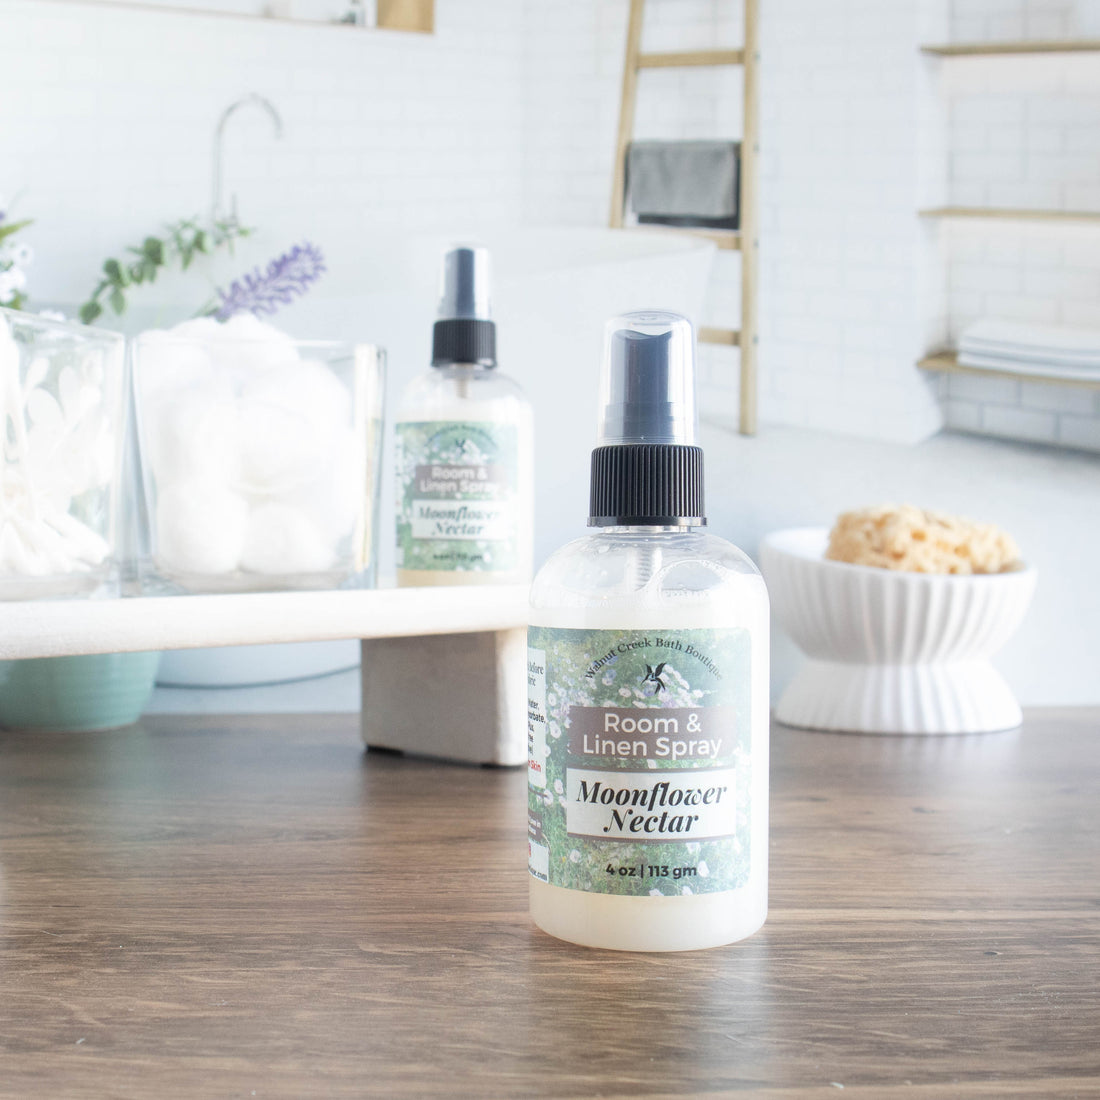 moonflower nectar room spray is front and center. it is in a squat round bottle with black sprayer. in the background is a tray with some cotton balls and q-tips in jars along with another room spray. in the background is an image of a spa bathroom and a dish with a loofah